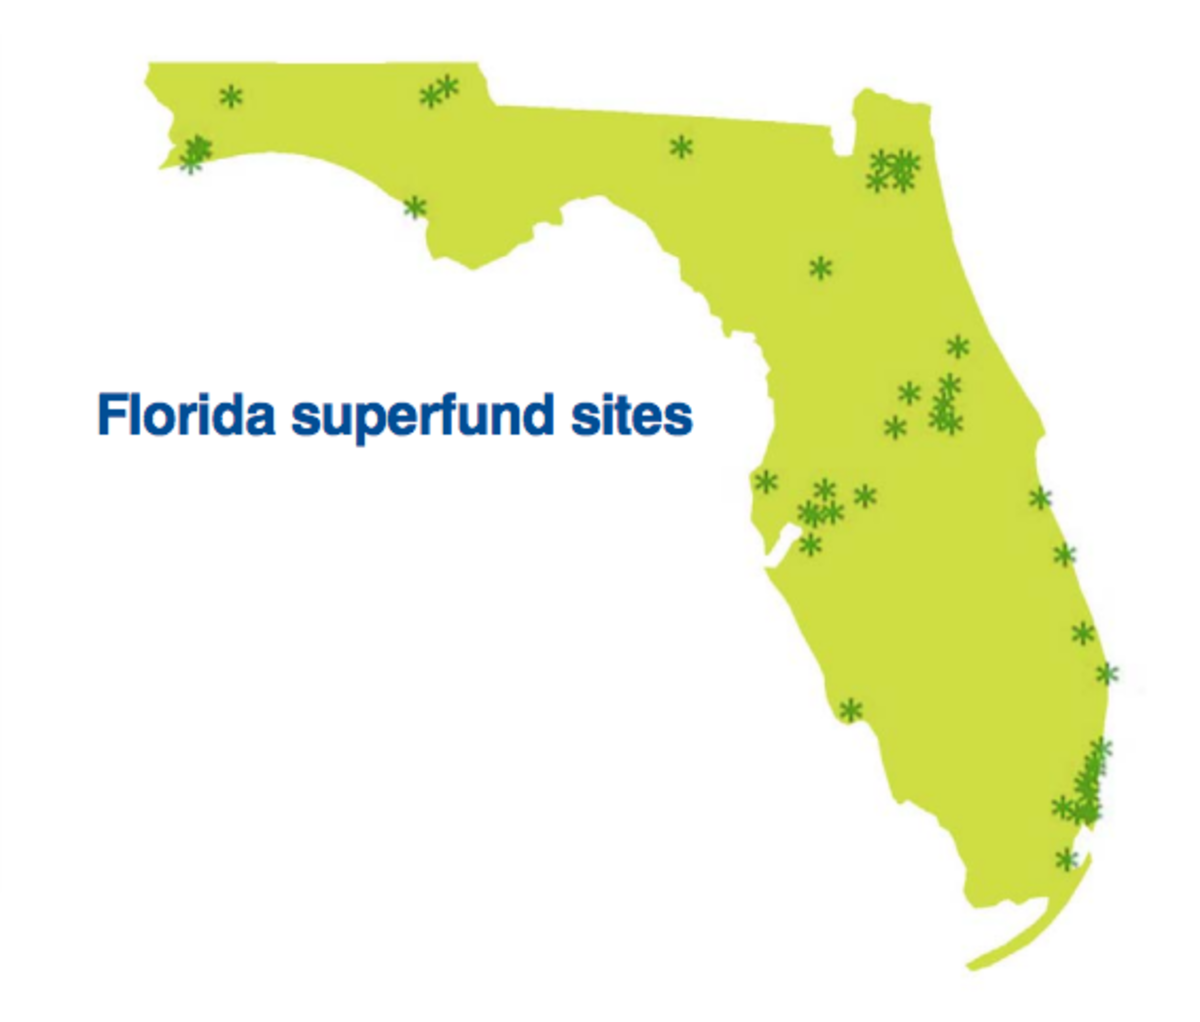 A map of Florida Superfund sites.